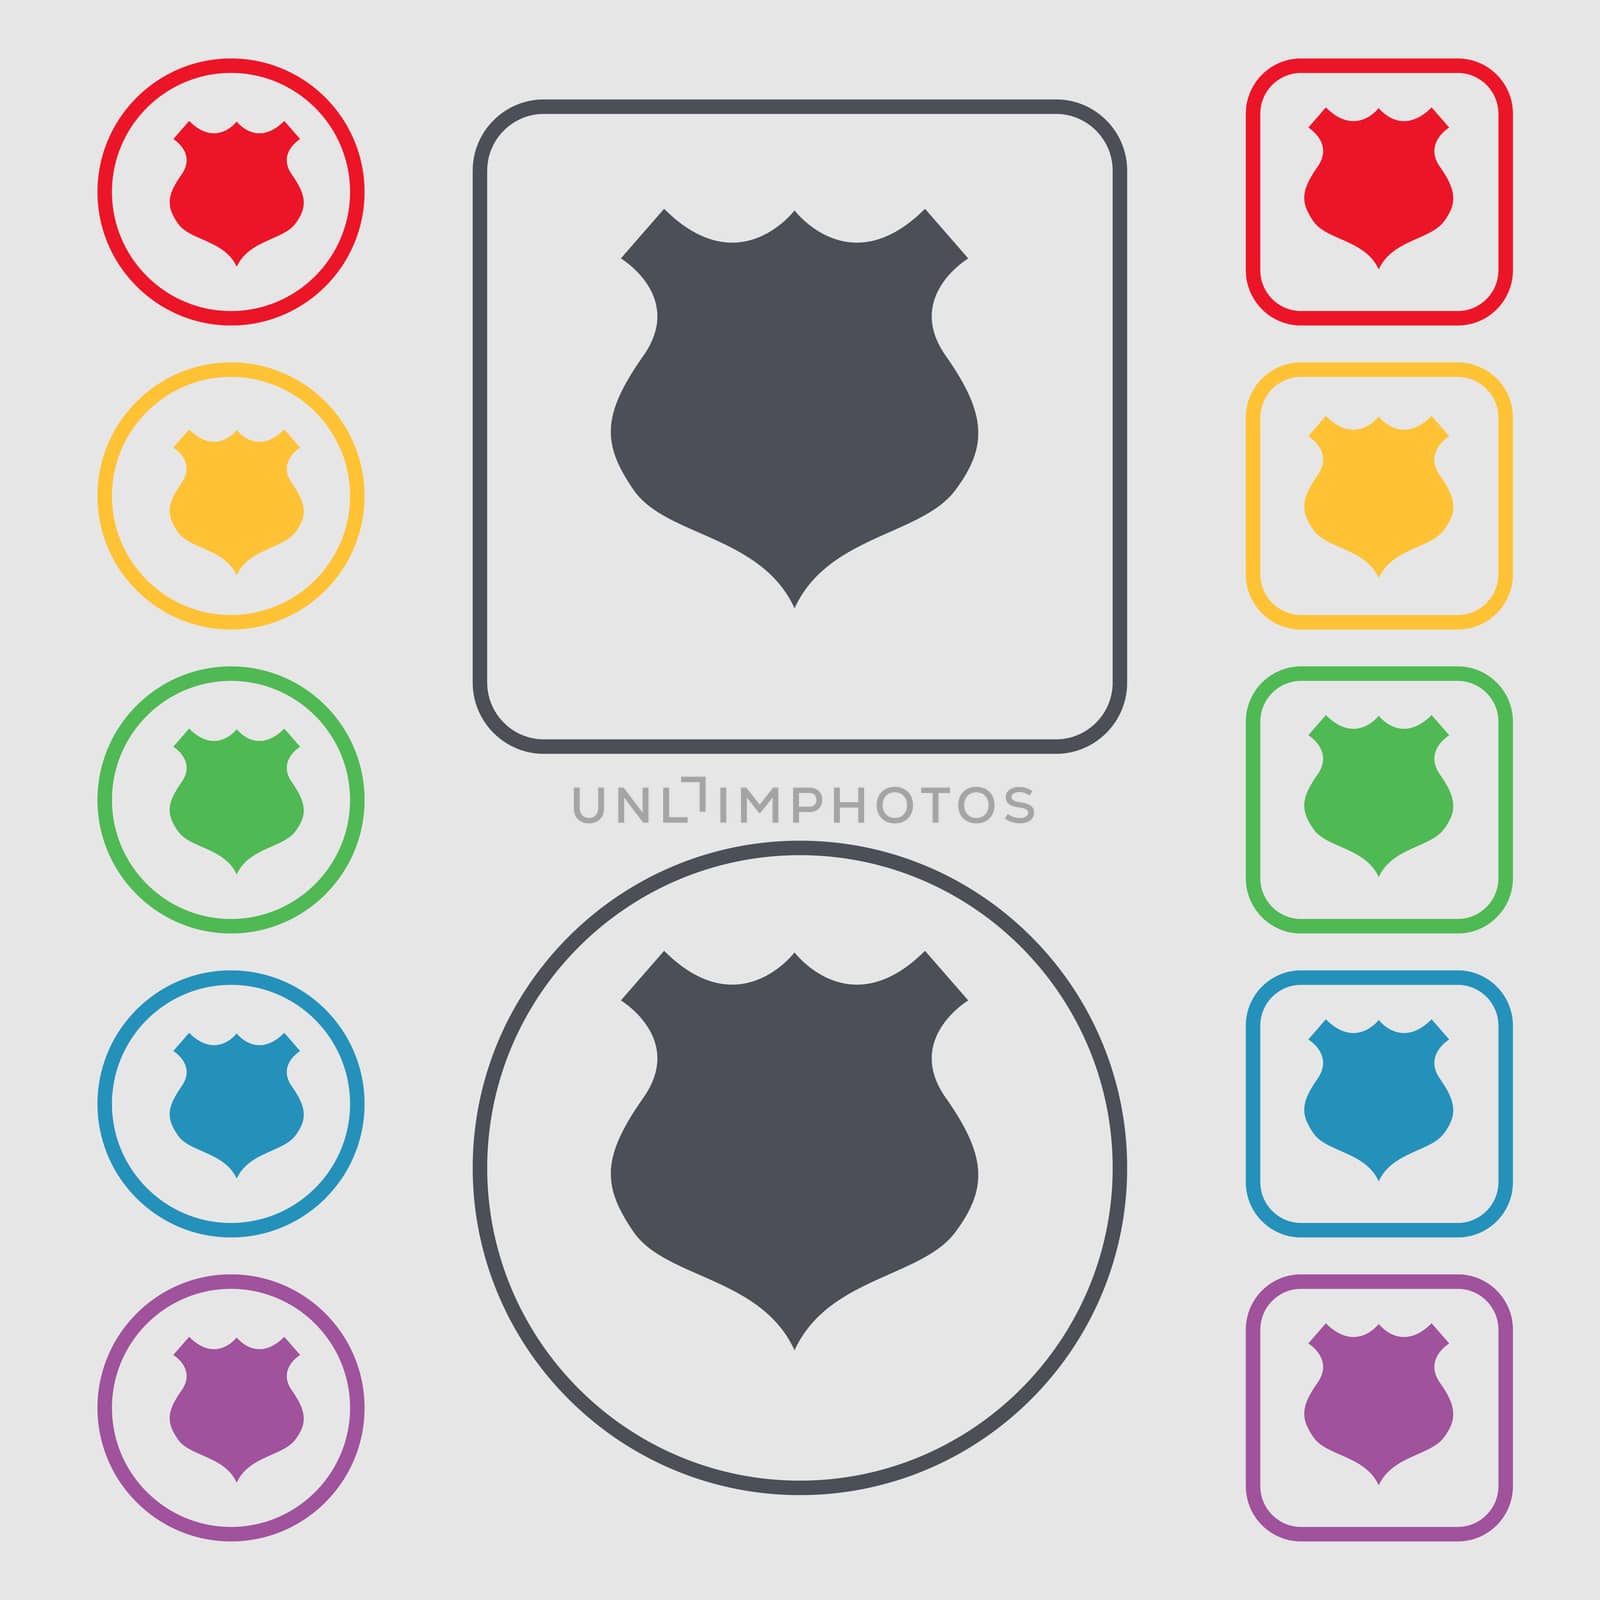 shield icon sign. symbol on the Round and square buttons with frame. illustration